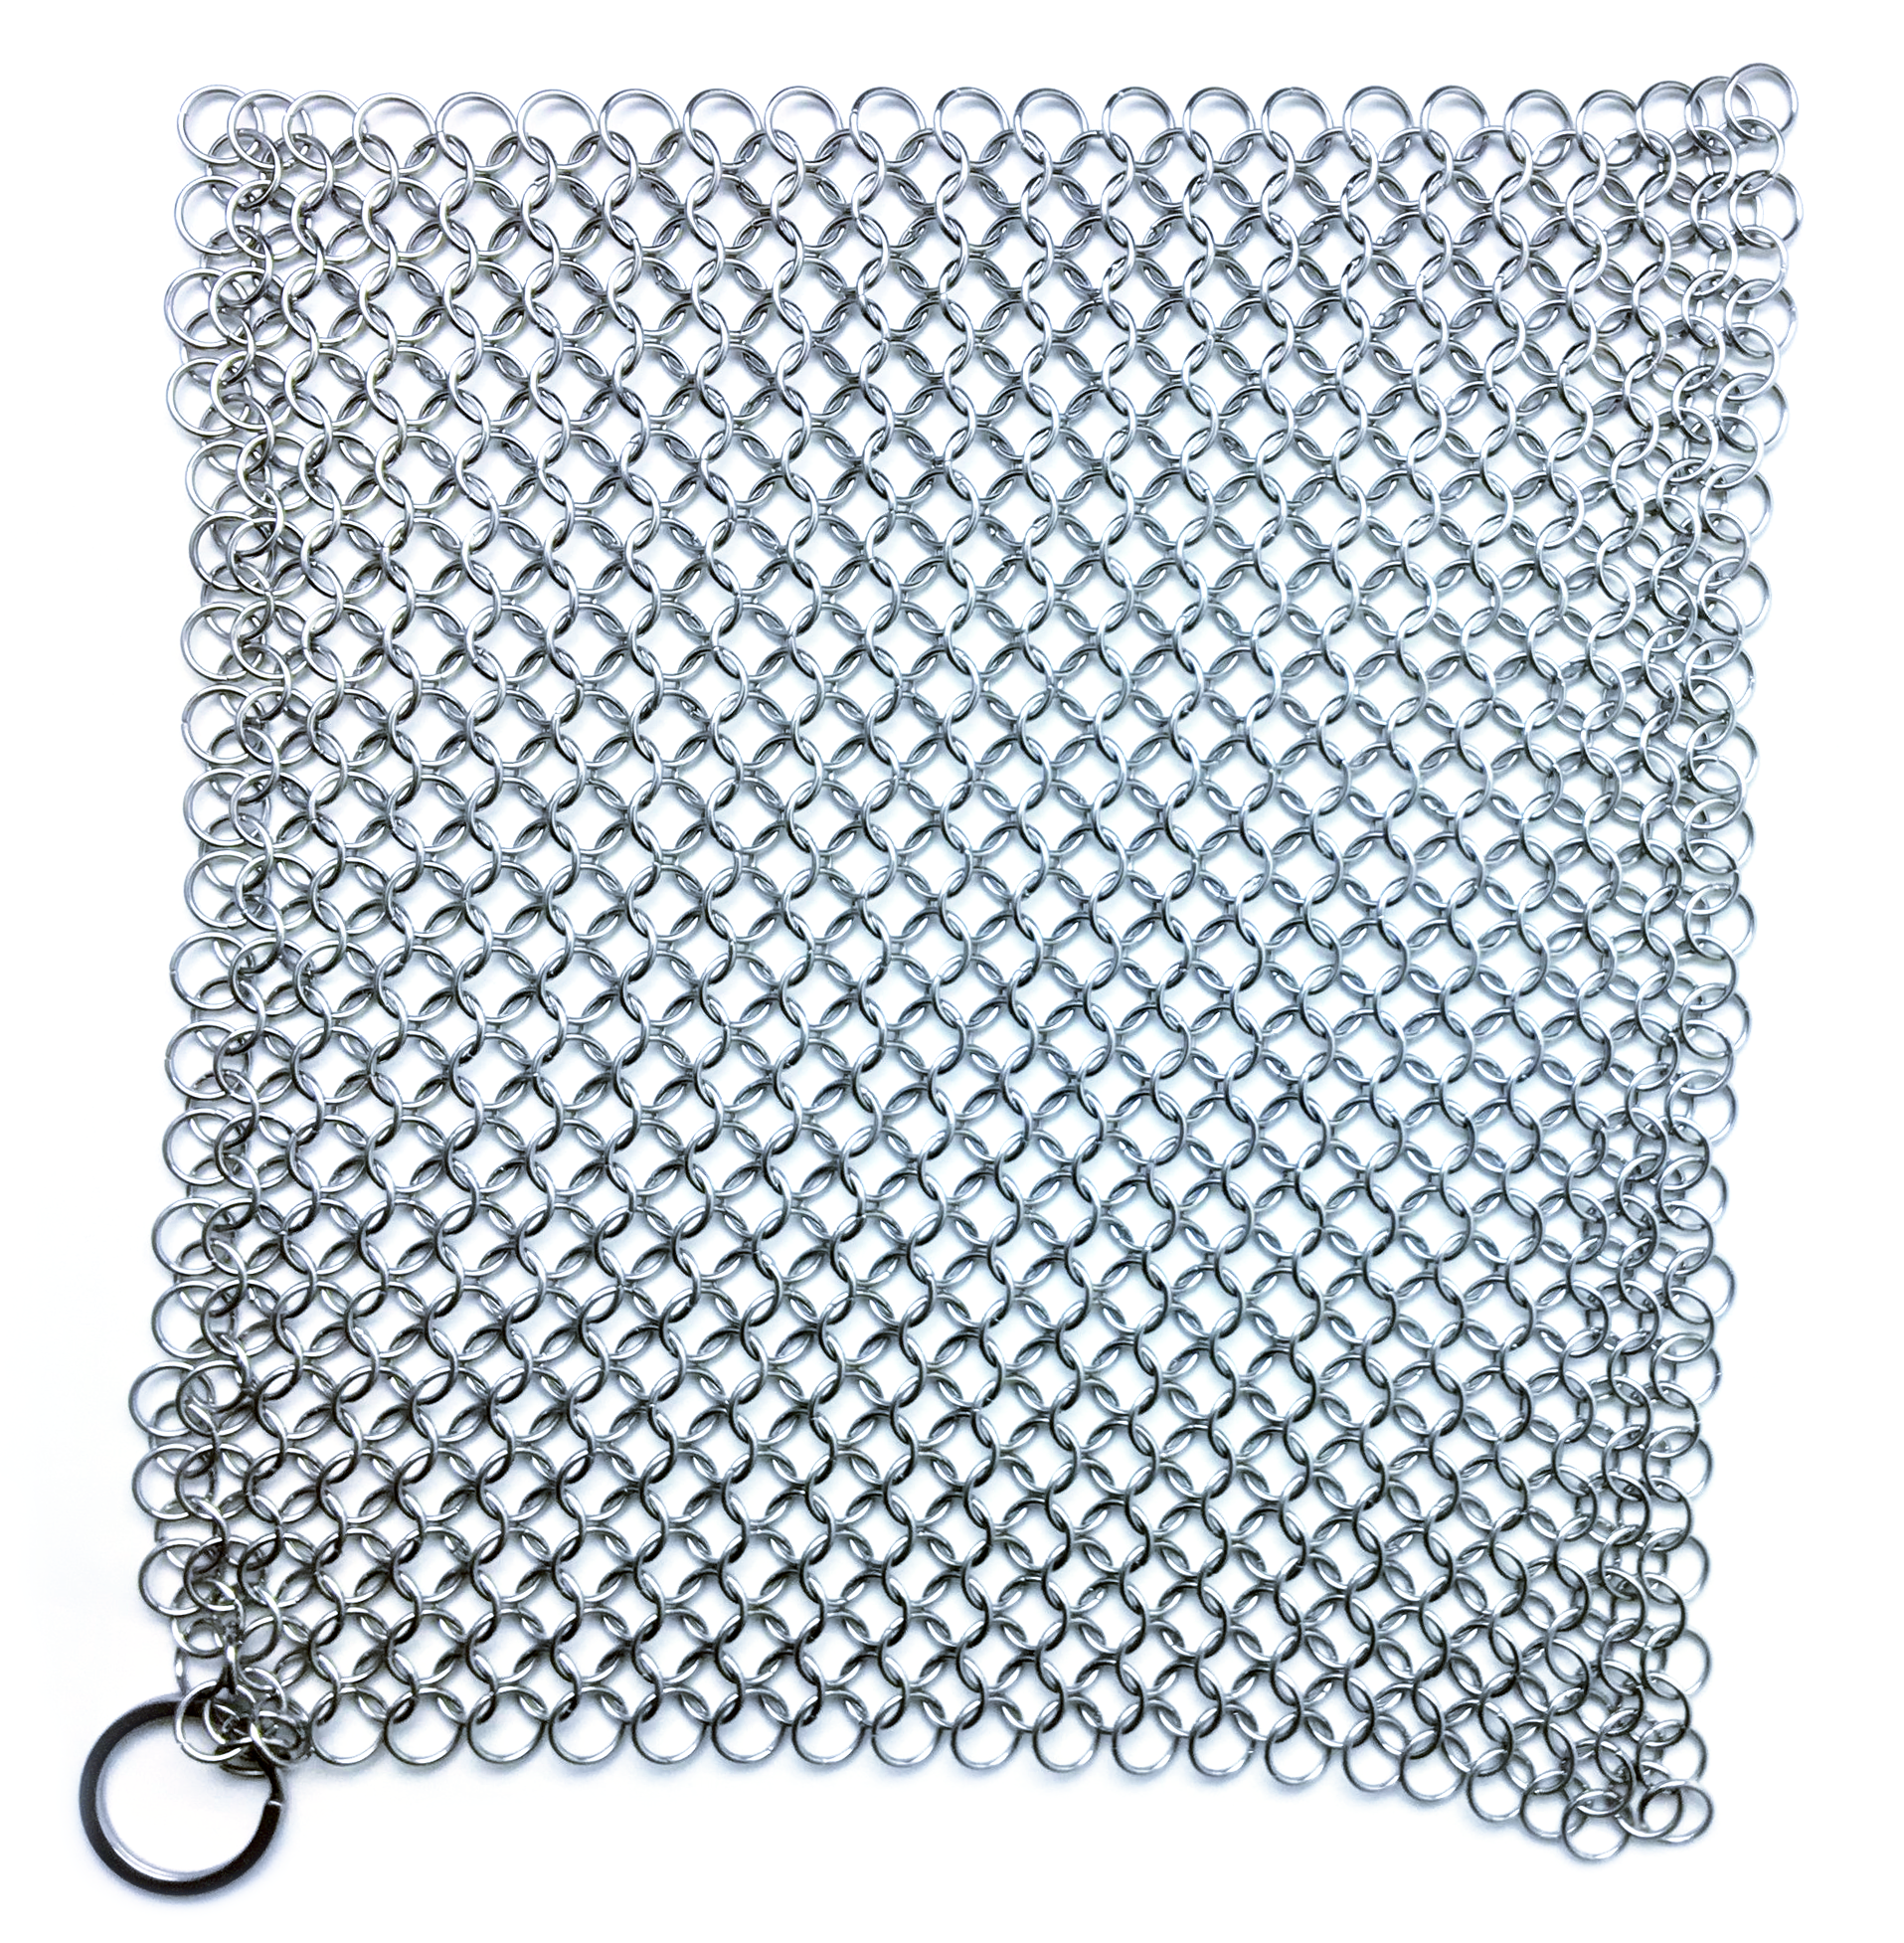 Chain mail for cast iron from Crisbee on white background